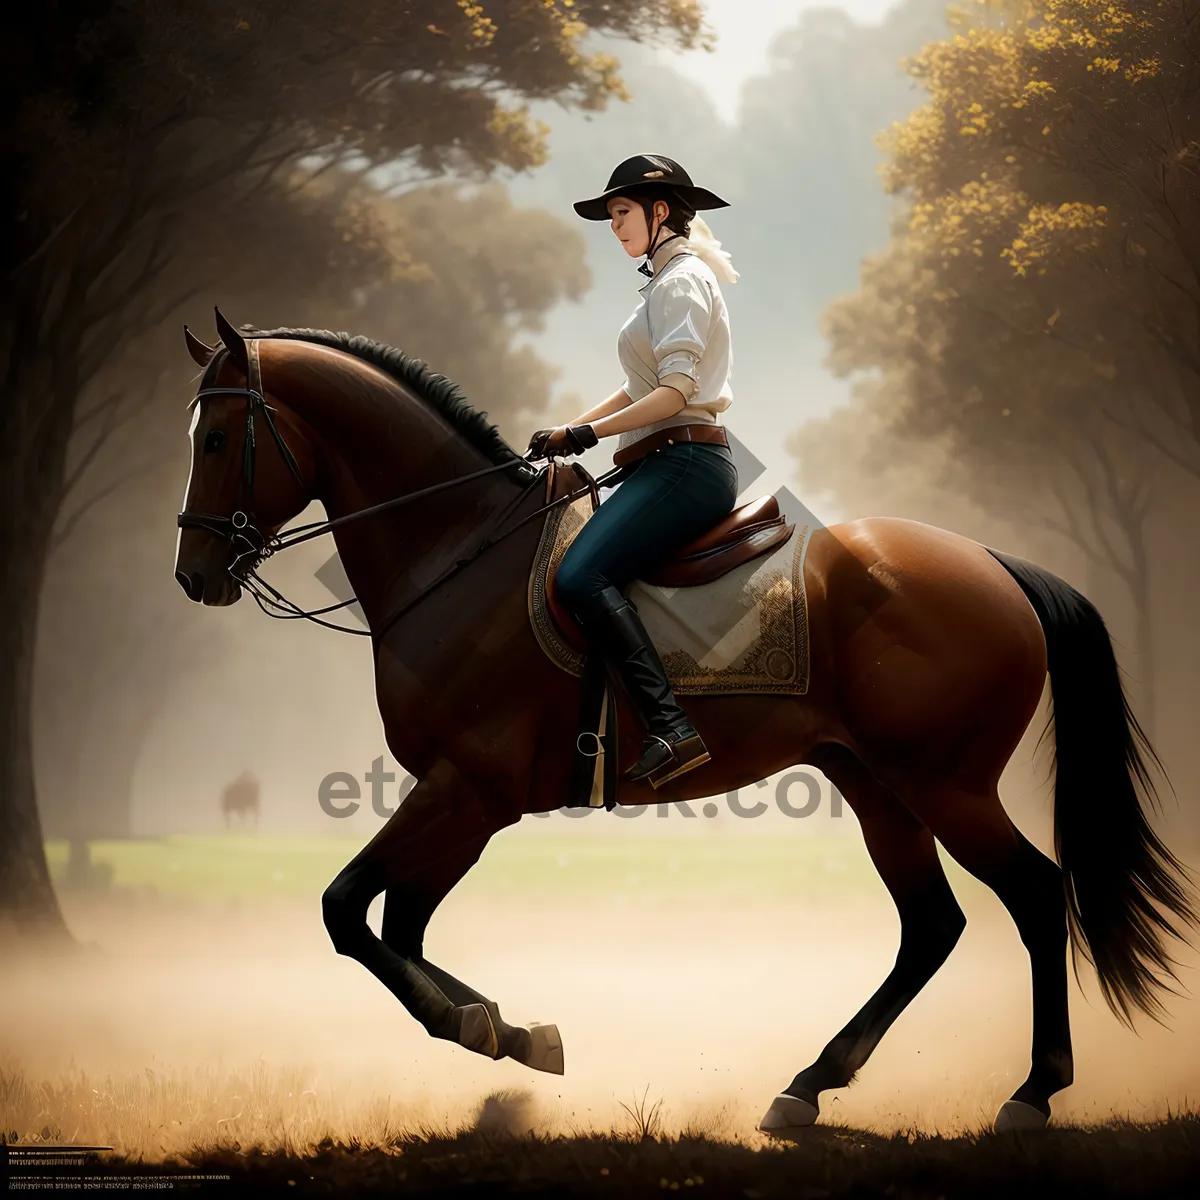 Picture of Silhouette of a Cowboy Riding a Vaulting Horse at Sunset